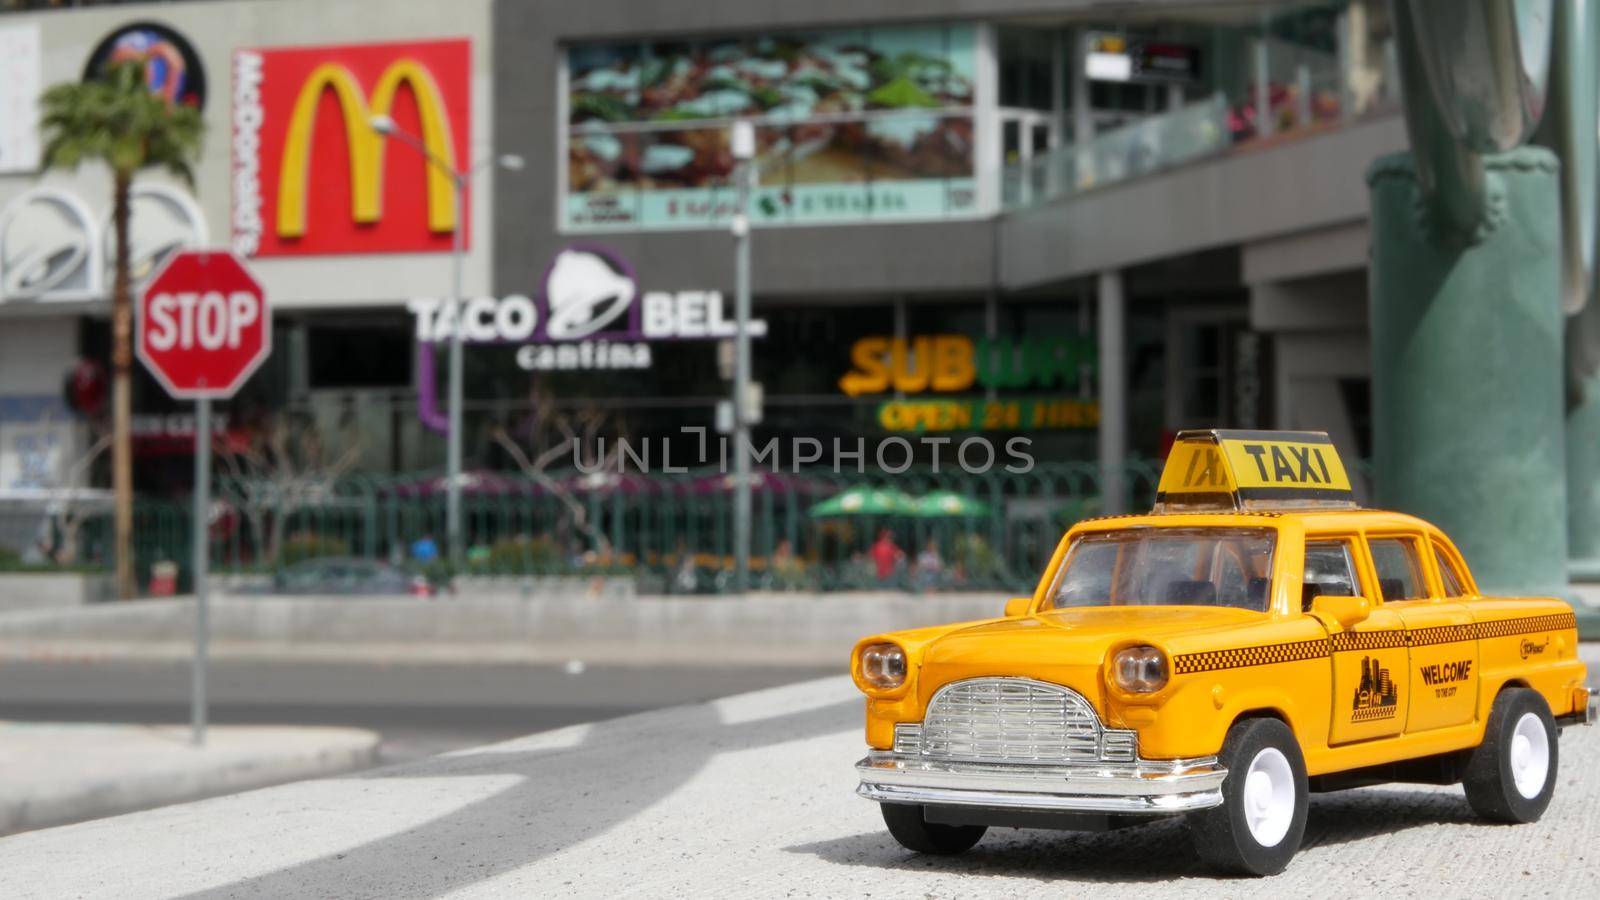 LAS VEGAS, NEVADA USA - 7 MAR 2020: Yellow vacant mini taxi cab close up on Harmon avenue corner. Small retro car model. Little iconic auto toy as symbol of transport against american shopping mall by DogoraSun